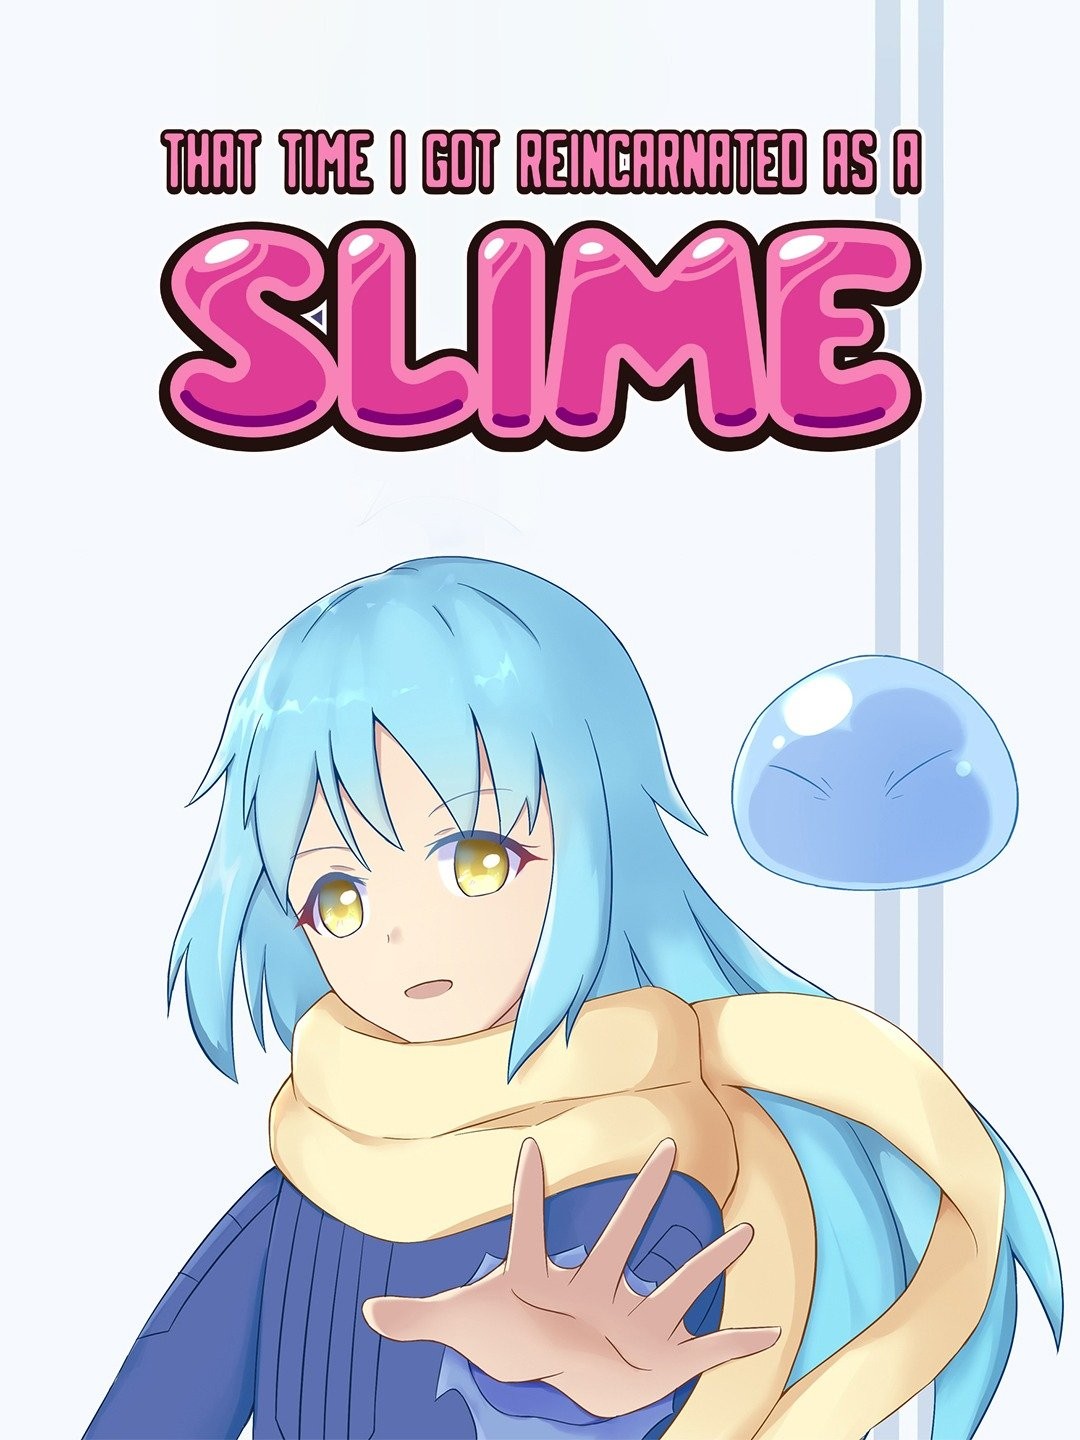  That Time I Got Reincarnated as a Slime 1